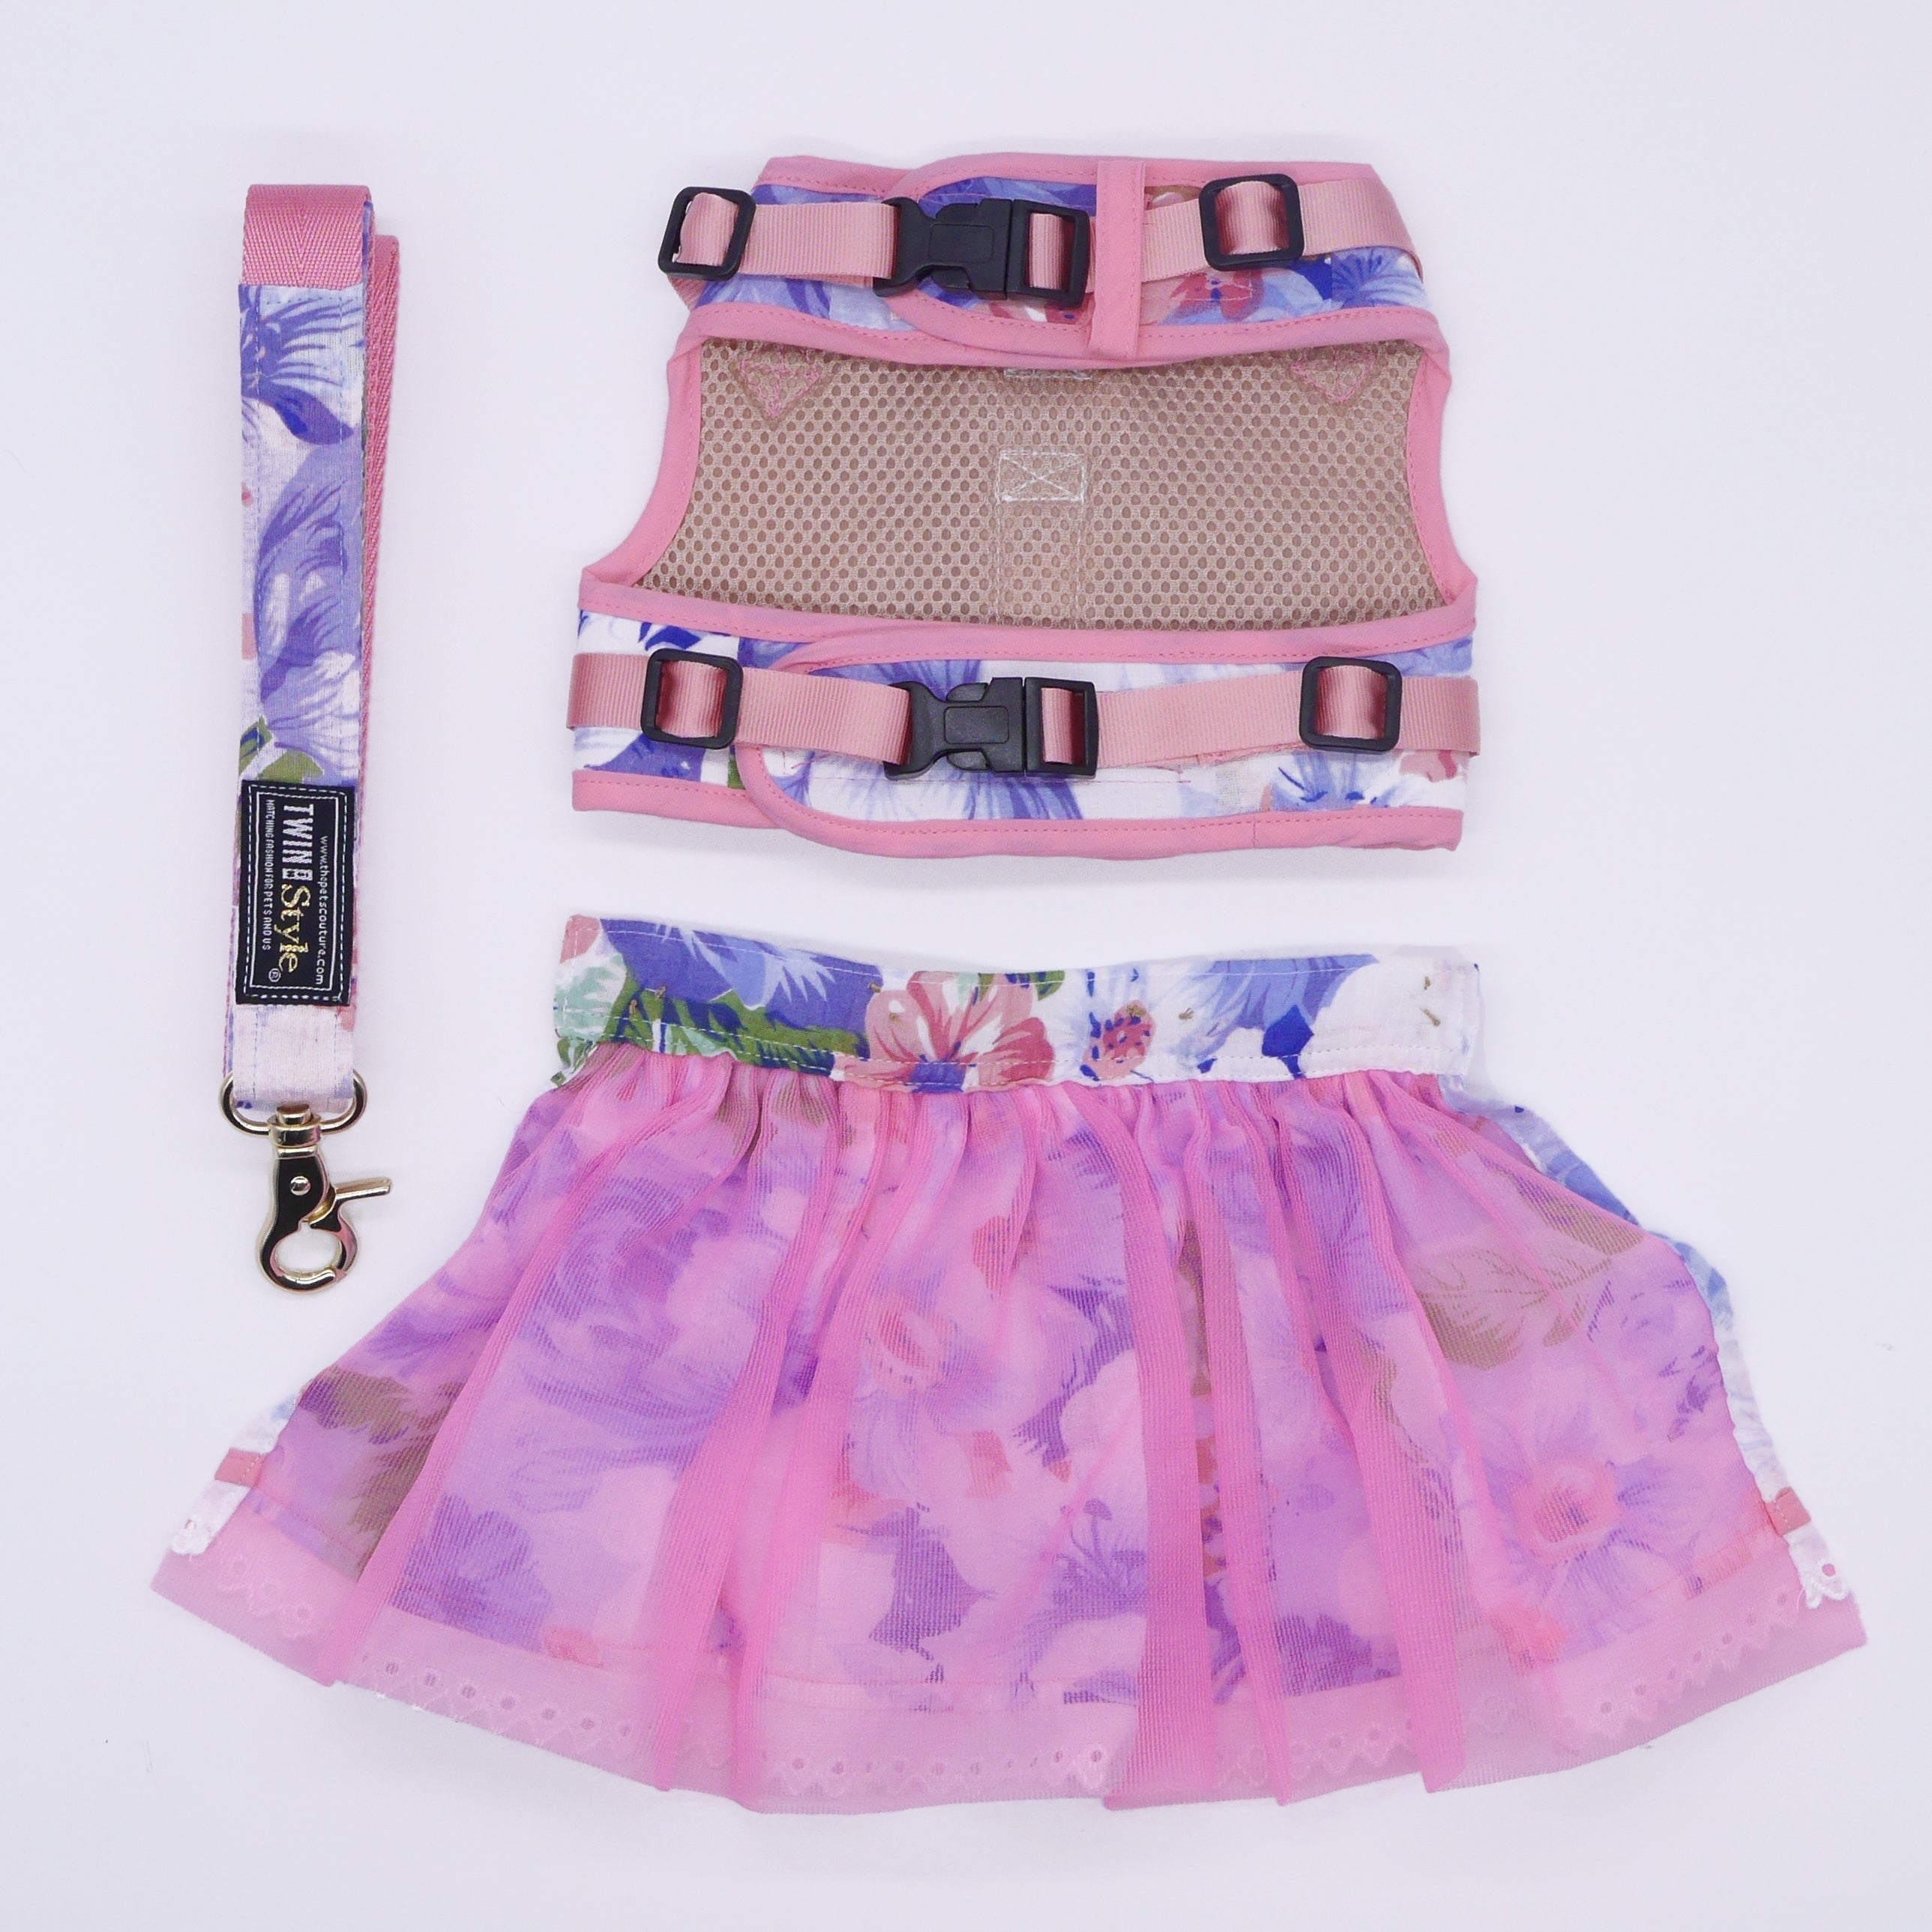 Tropical Fauna Pink Harness with Detachable Skirt + Leash Set - Twin In Style (For Her) - The Pet's Couture